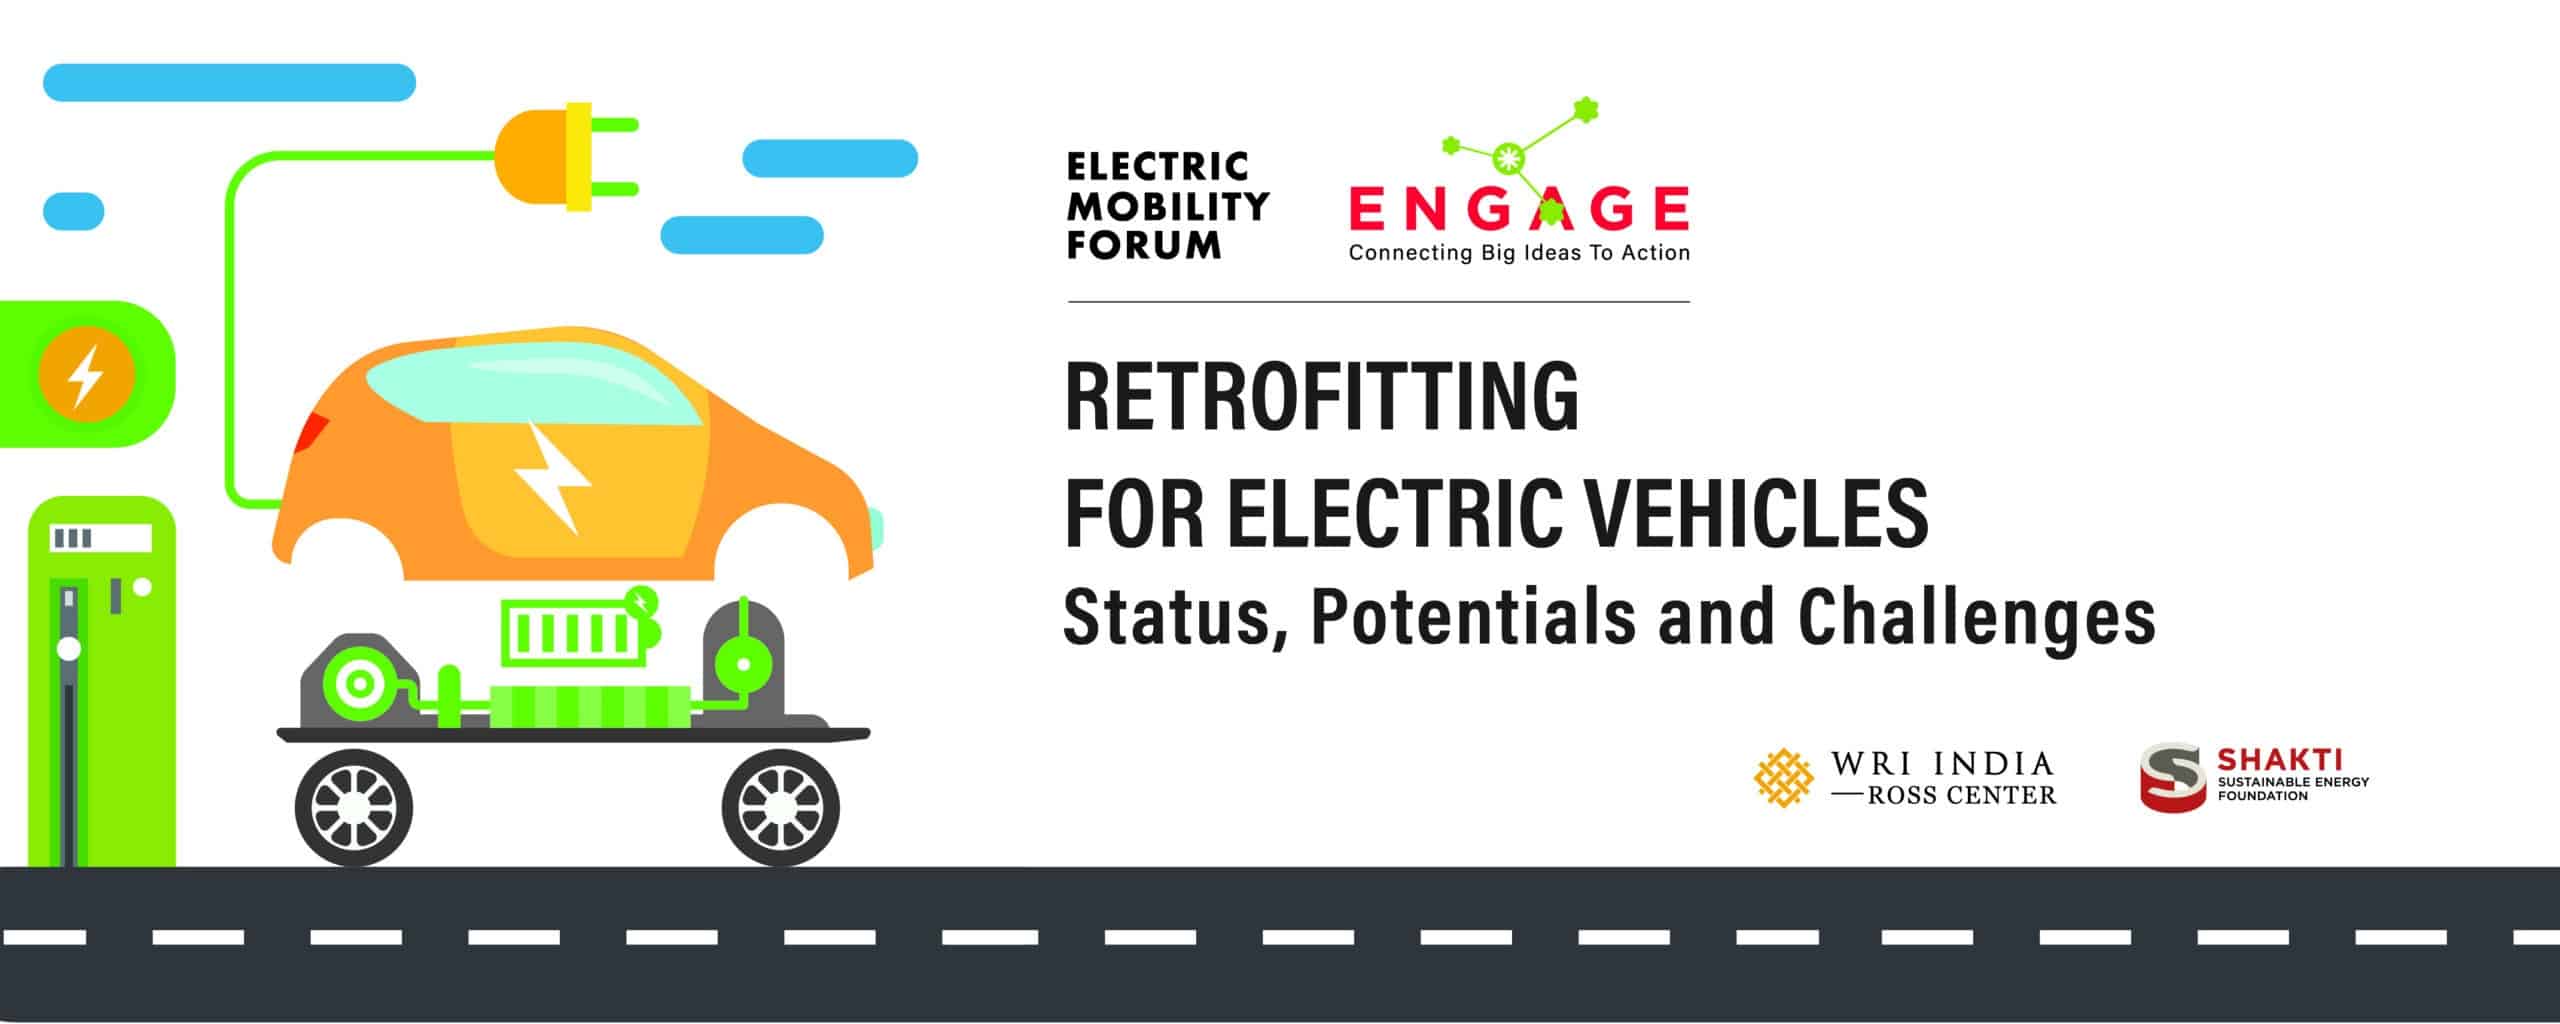 Retrofitting for Electric Vehicles: Status, Potential and Challenges